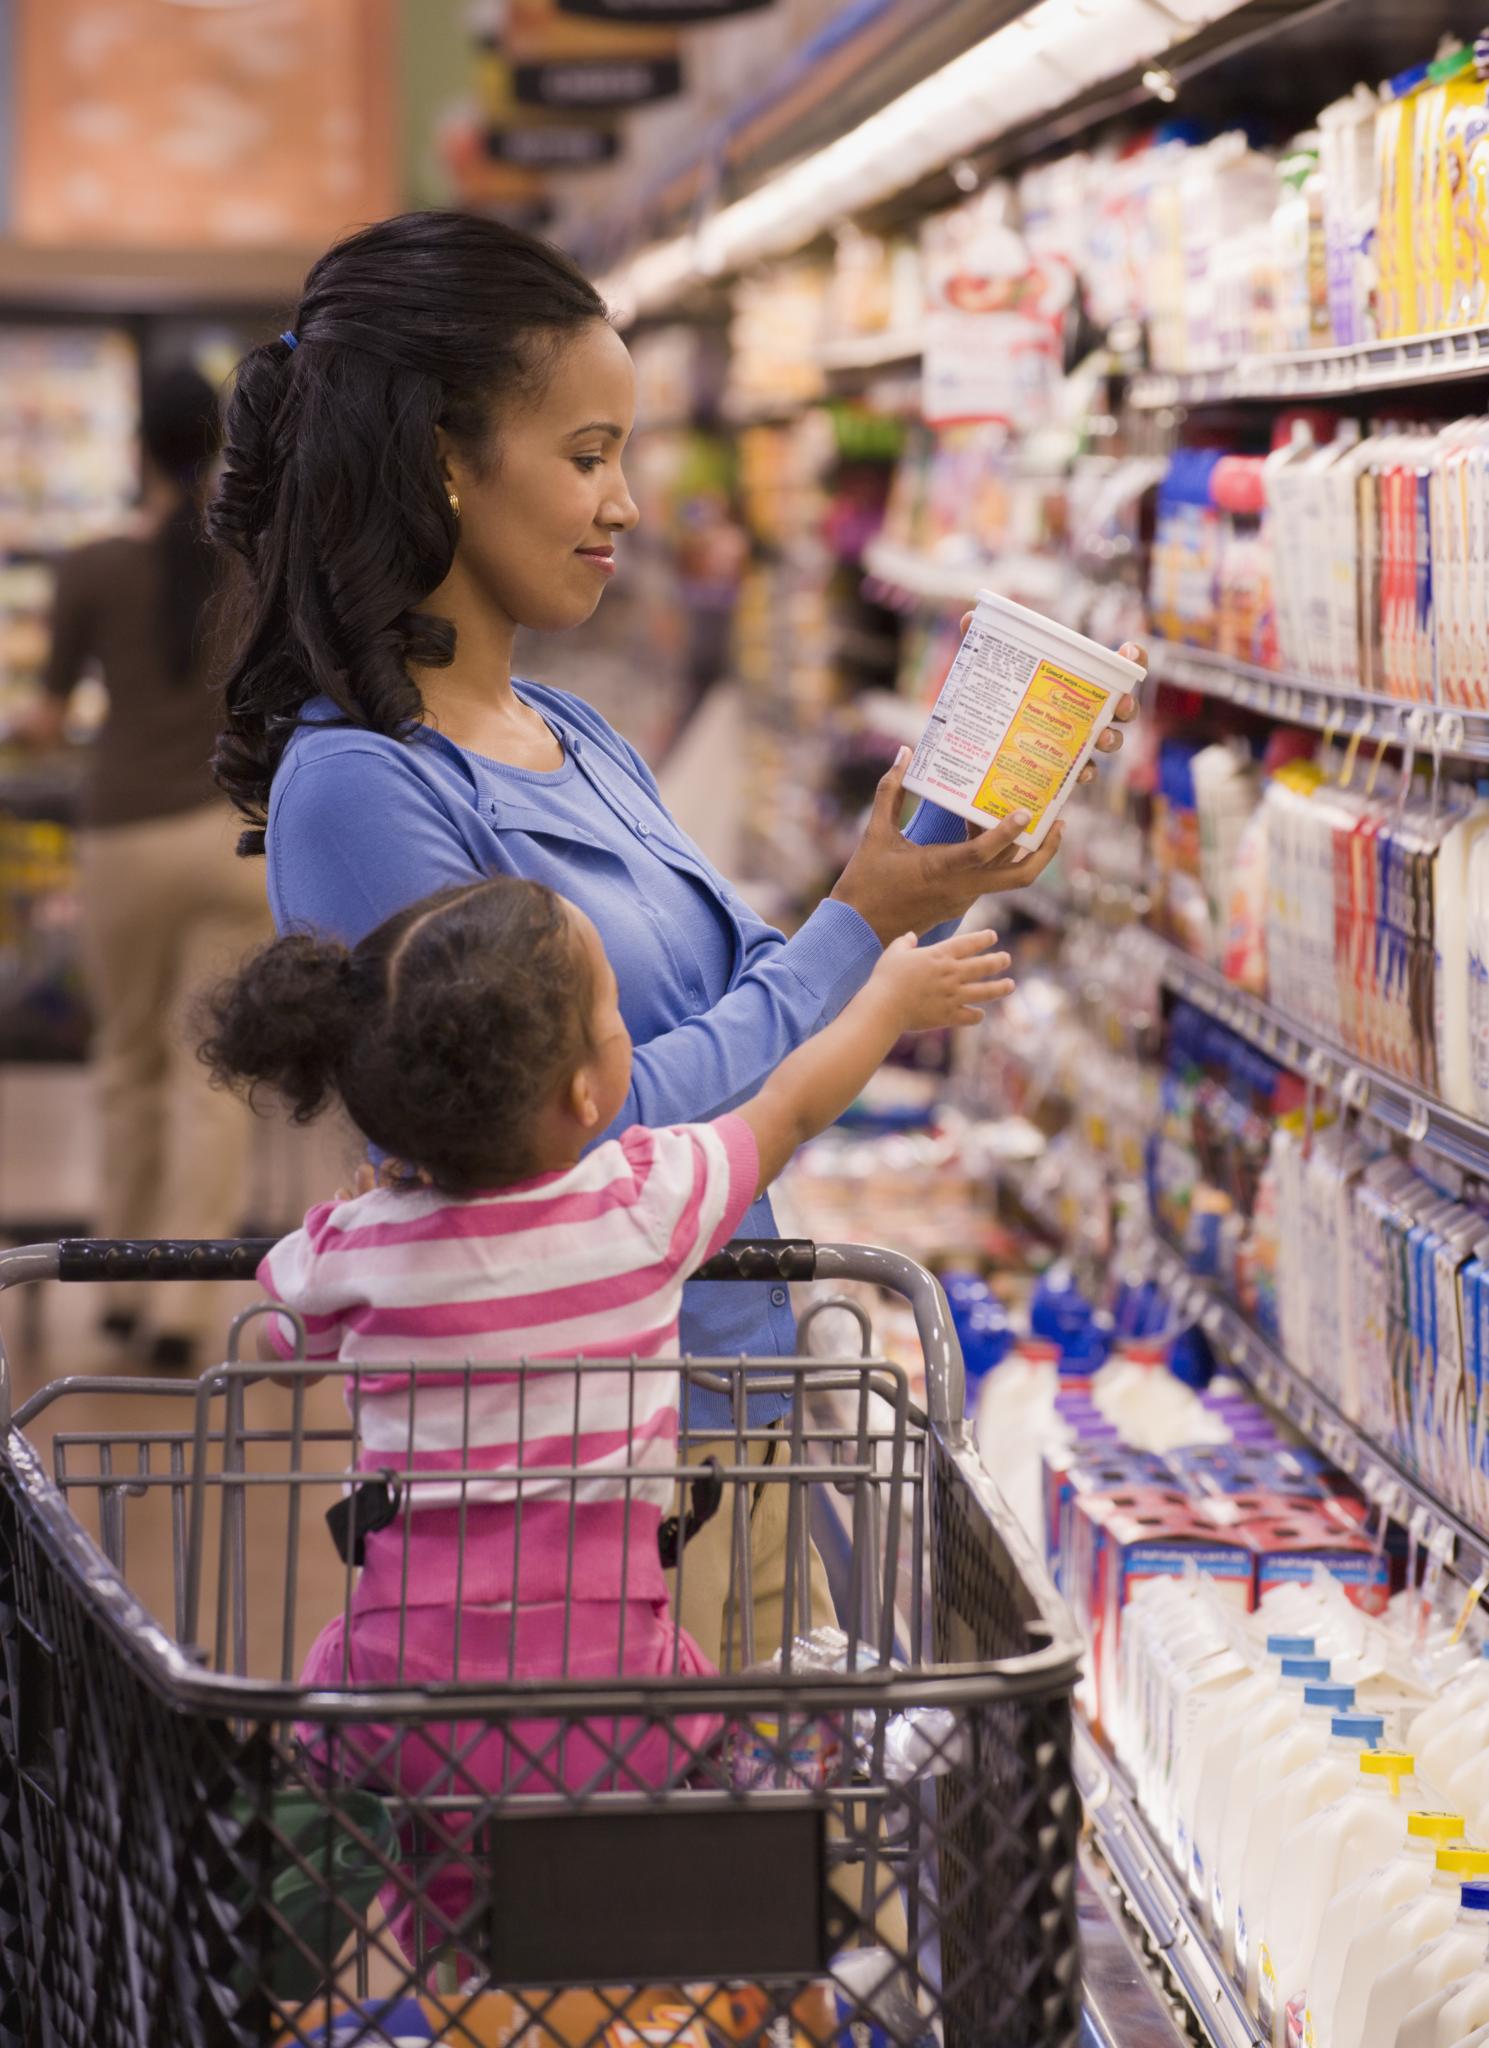 Should the Government Regulate Which Foods You Can Buy With Food Stamps?